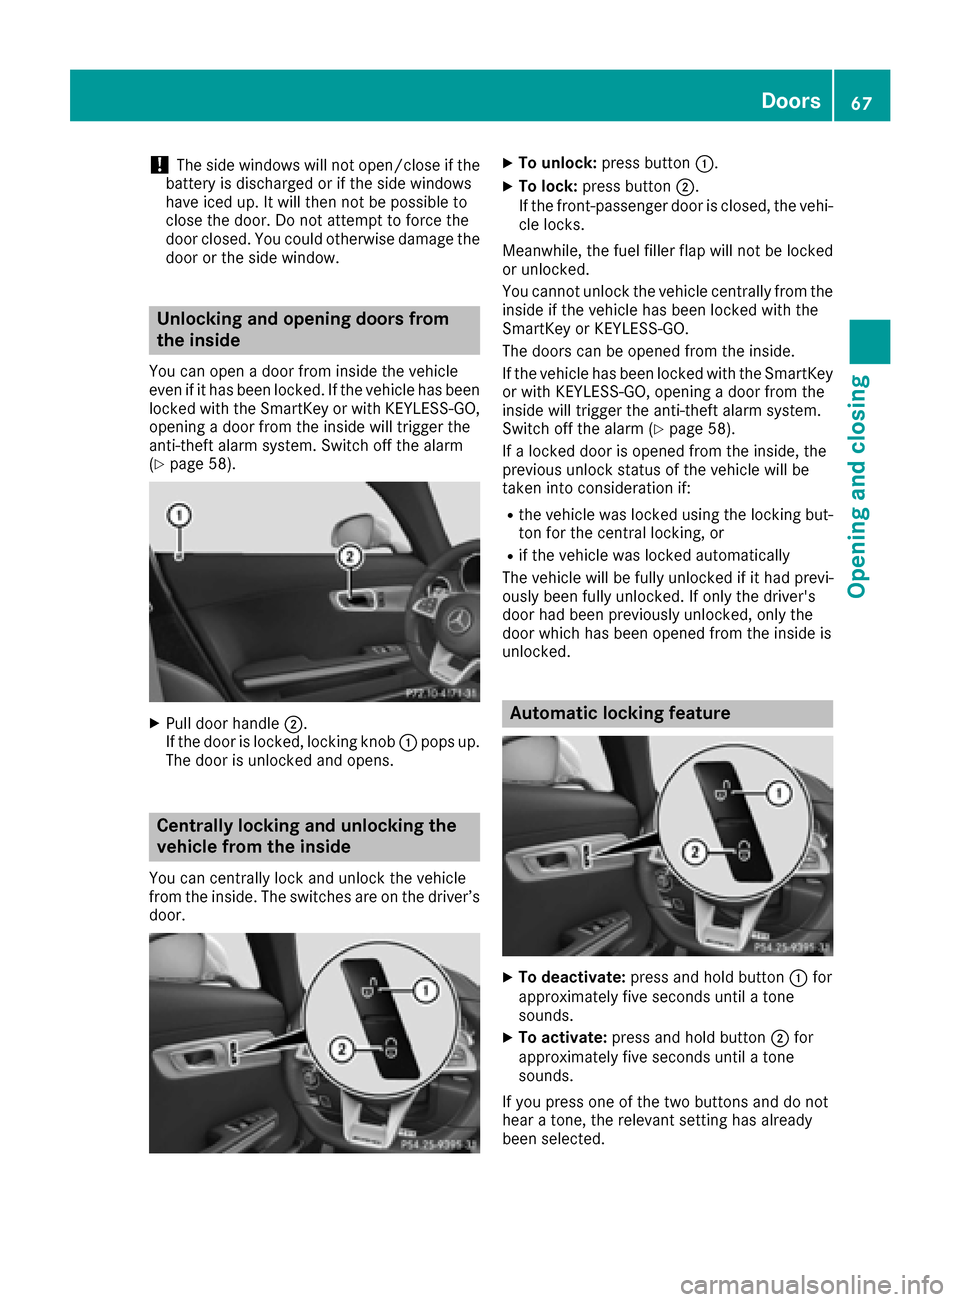 MERCEDES-BENZ AMG GT S 2017 C190 Owners Manual !The side windows will not open/close if the
battery is discharged or if the side windows
have iced up. It will then not be possible to
close the door. Do not attempt to force the
door closed. You cou